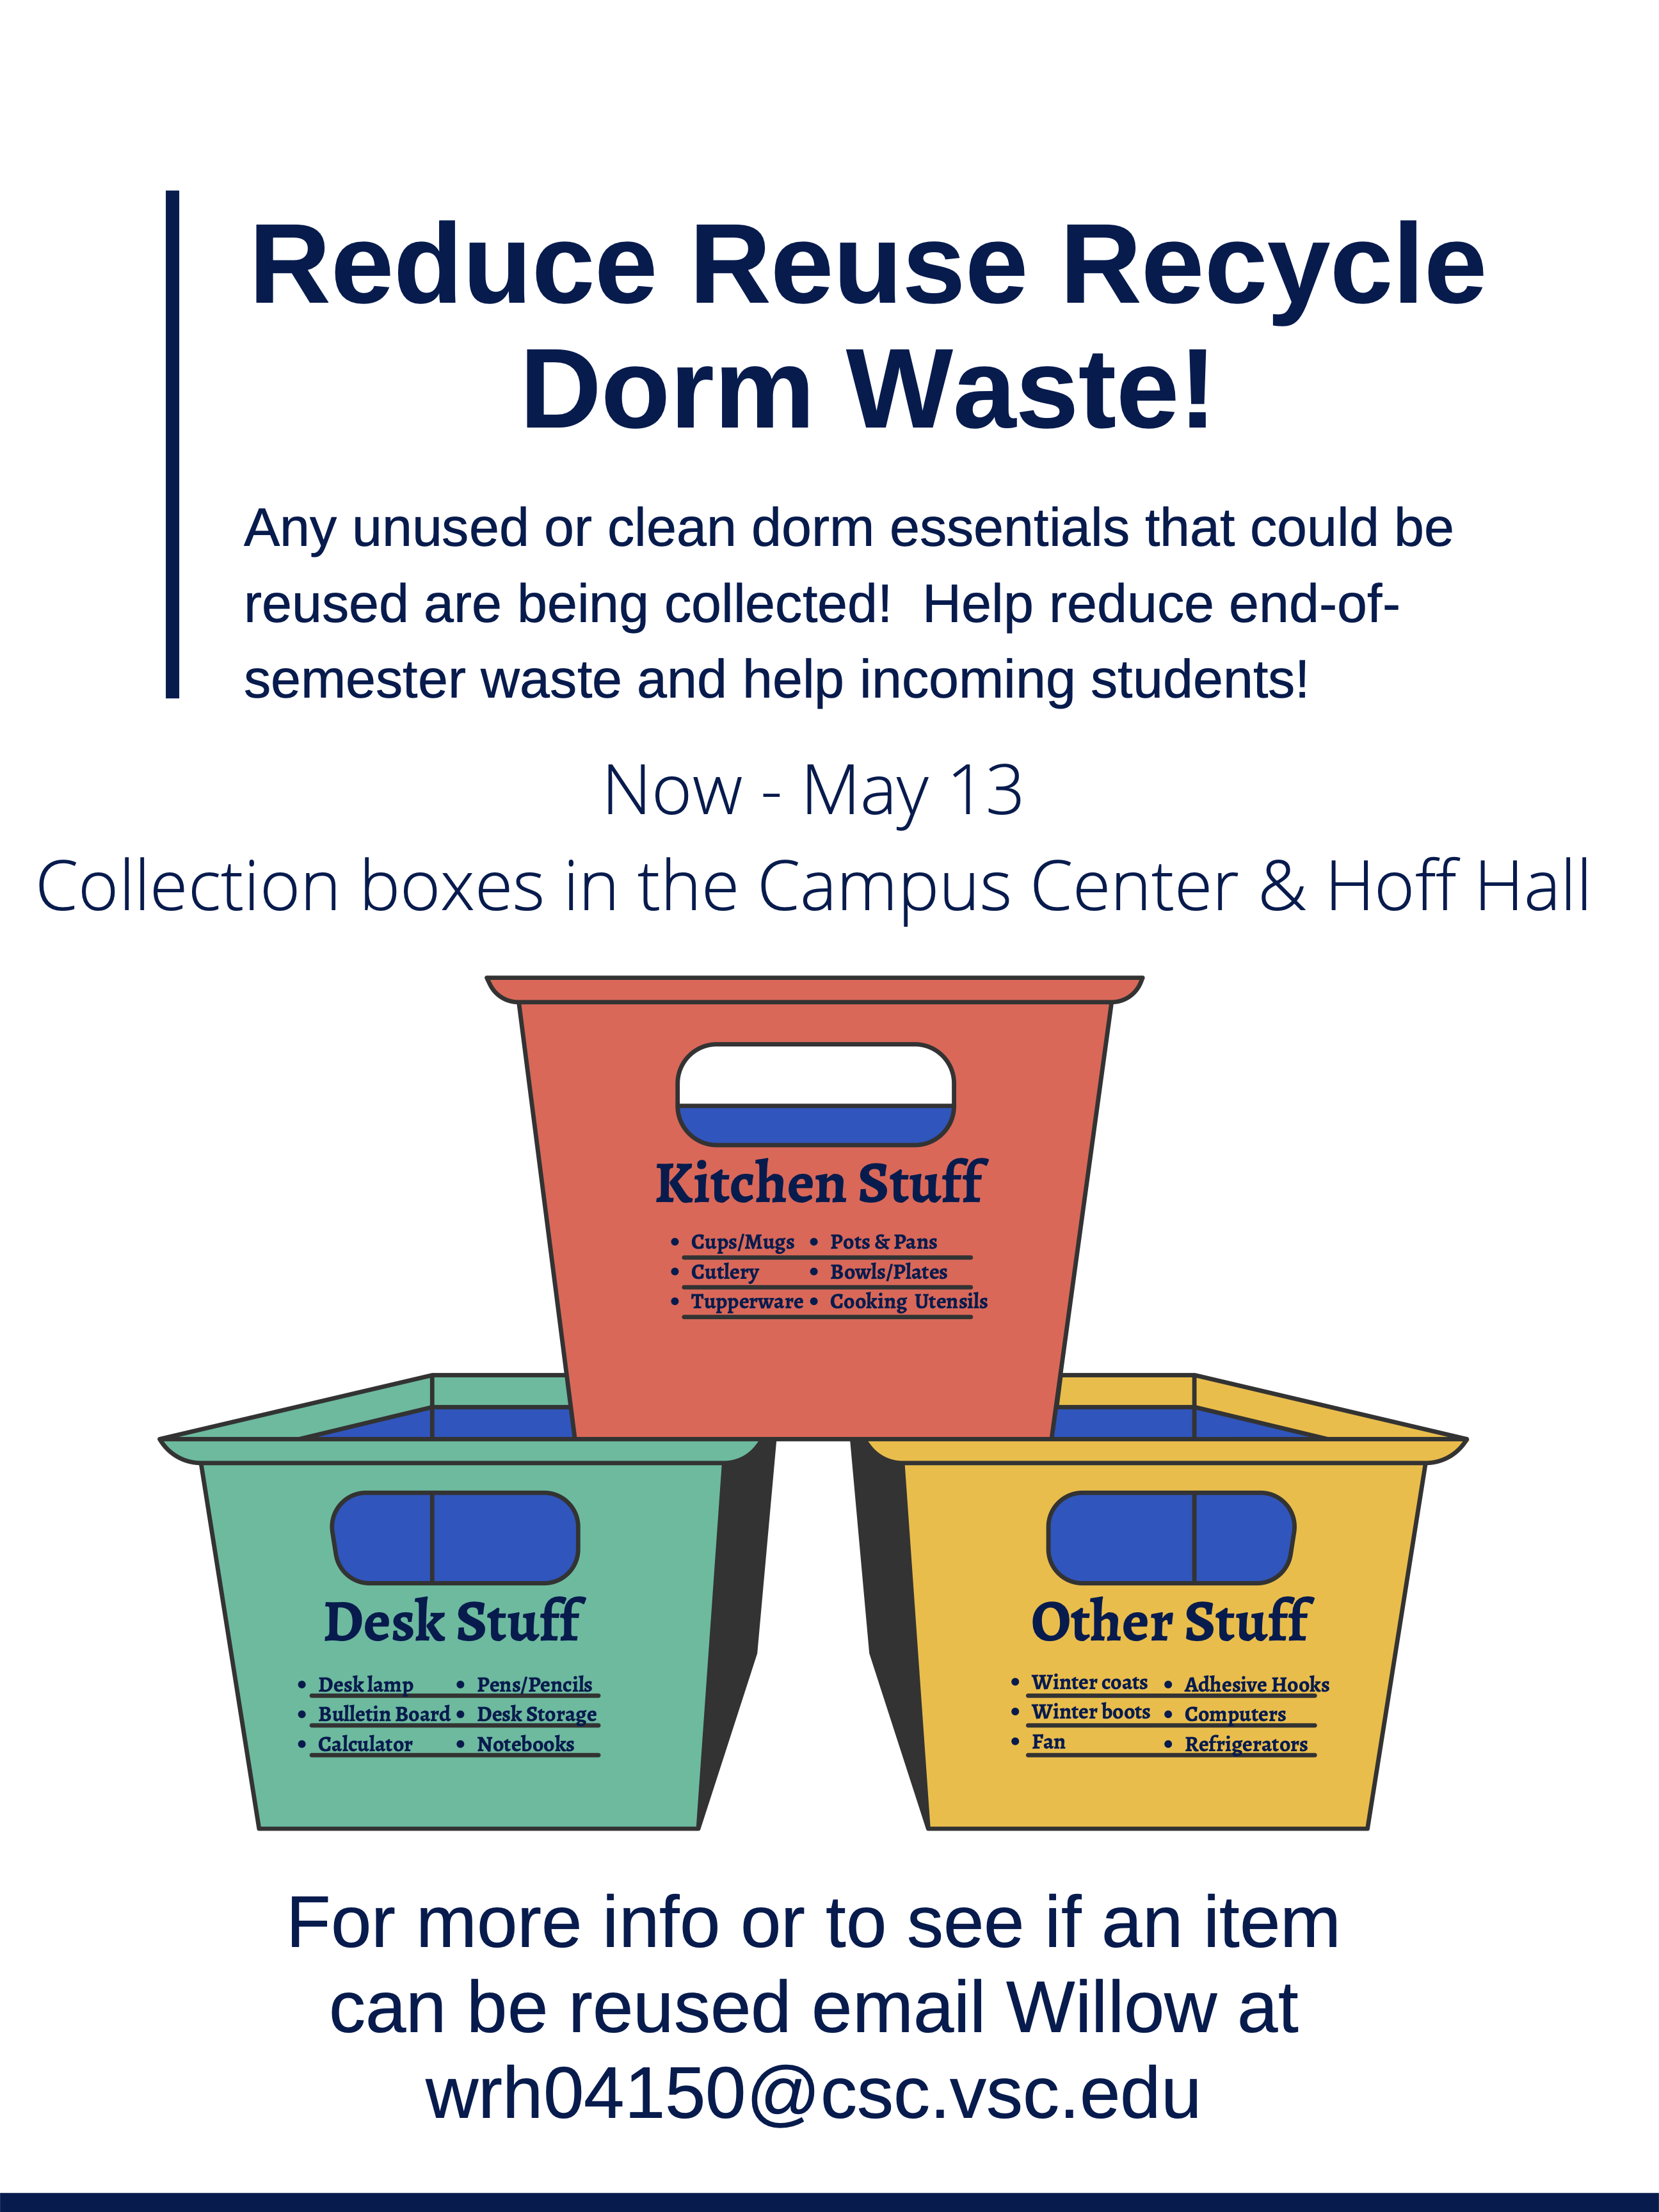 Reduce, Reuse, Recycle: Dorm Waste!